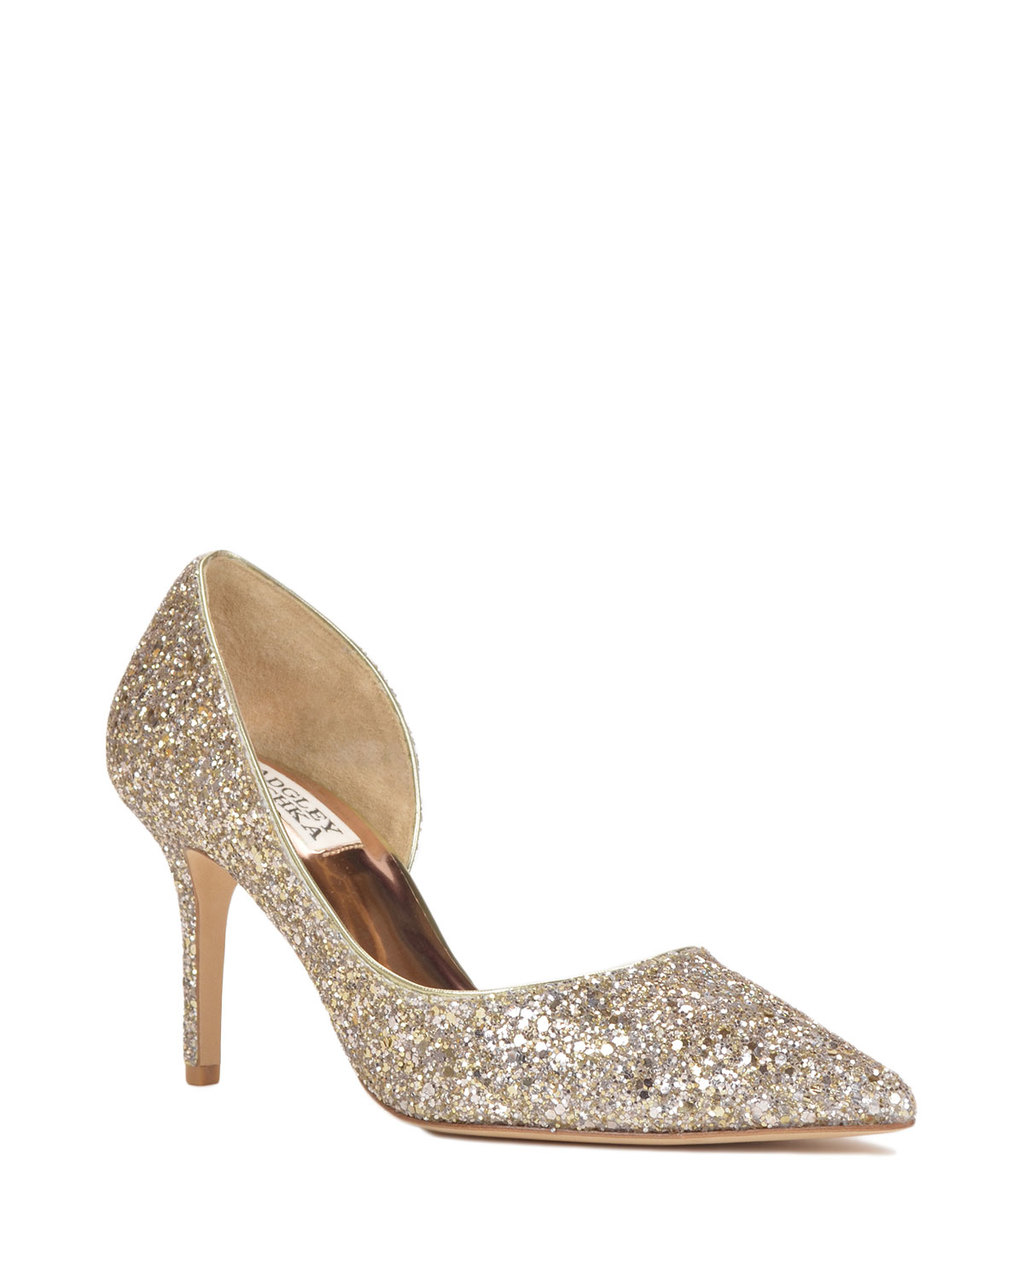 Daisy Pointed Toe Evening Shoe by 